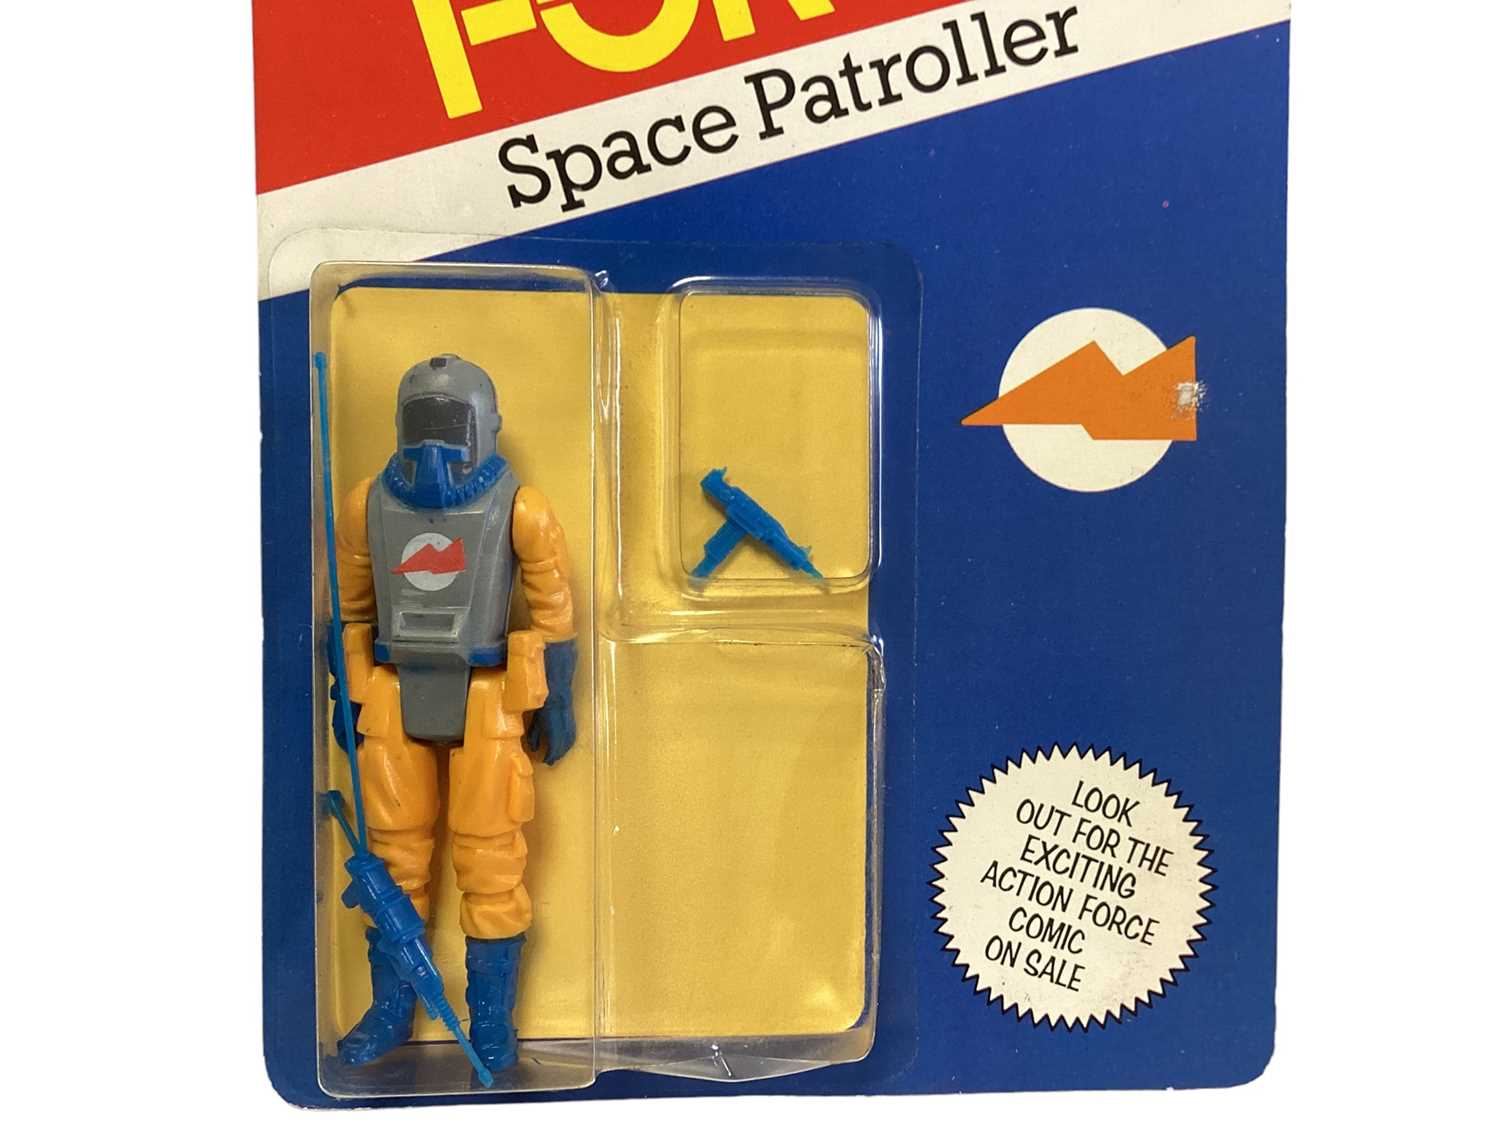 Palitoy Action Man Action Force Space Patroller (Space Security Trooper Weapon), on card with bliste - Image 2 of 3